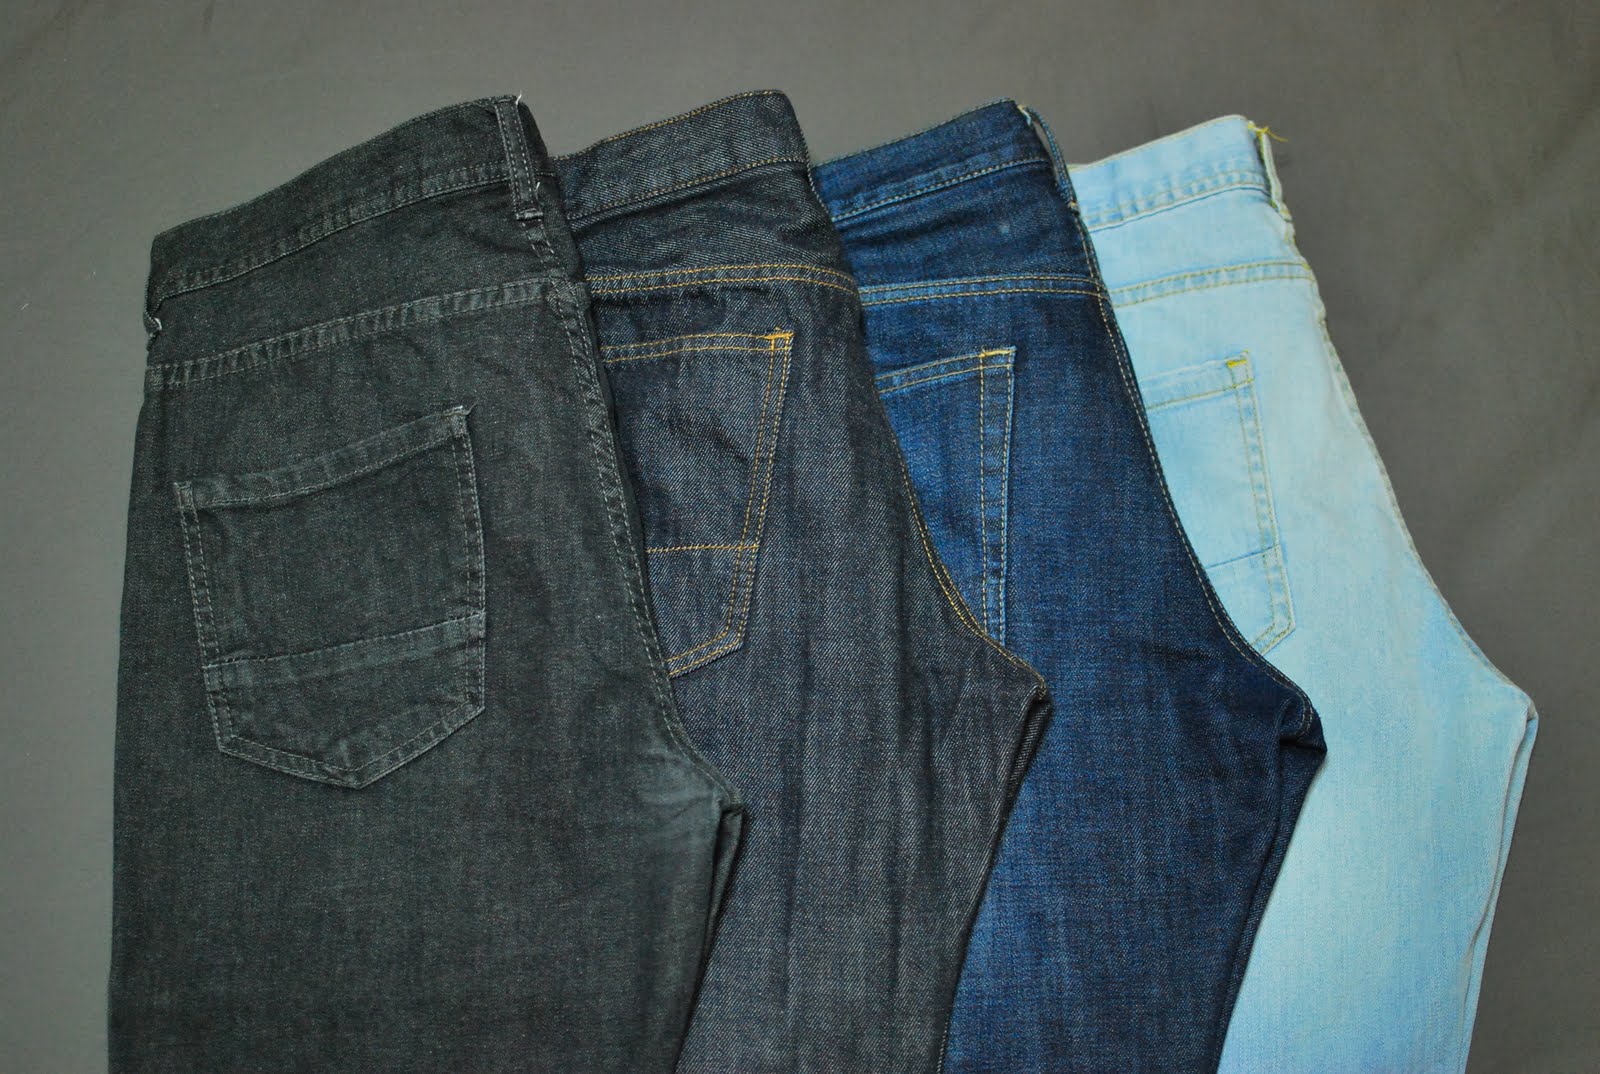 STYLES I LOVE: The Item: The Essential Muji Jeans